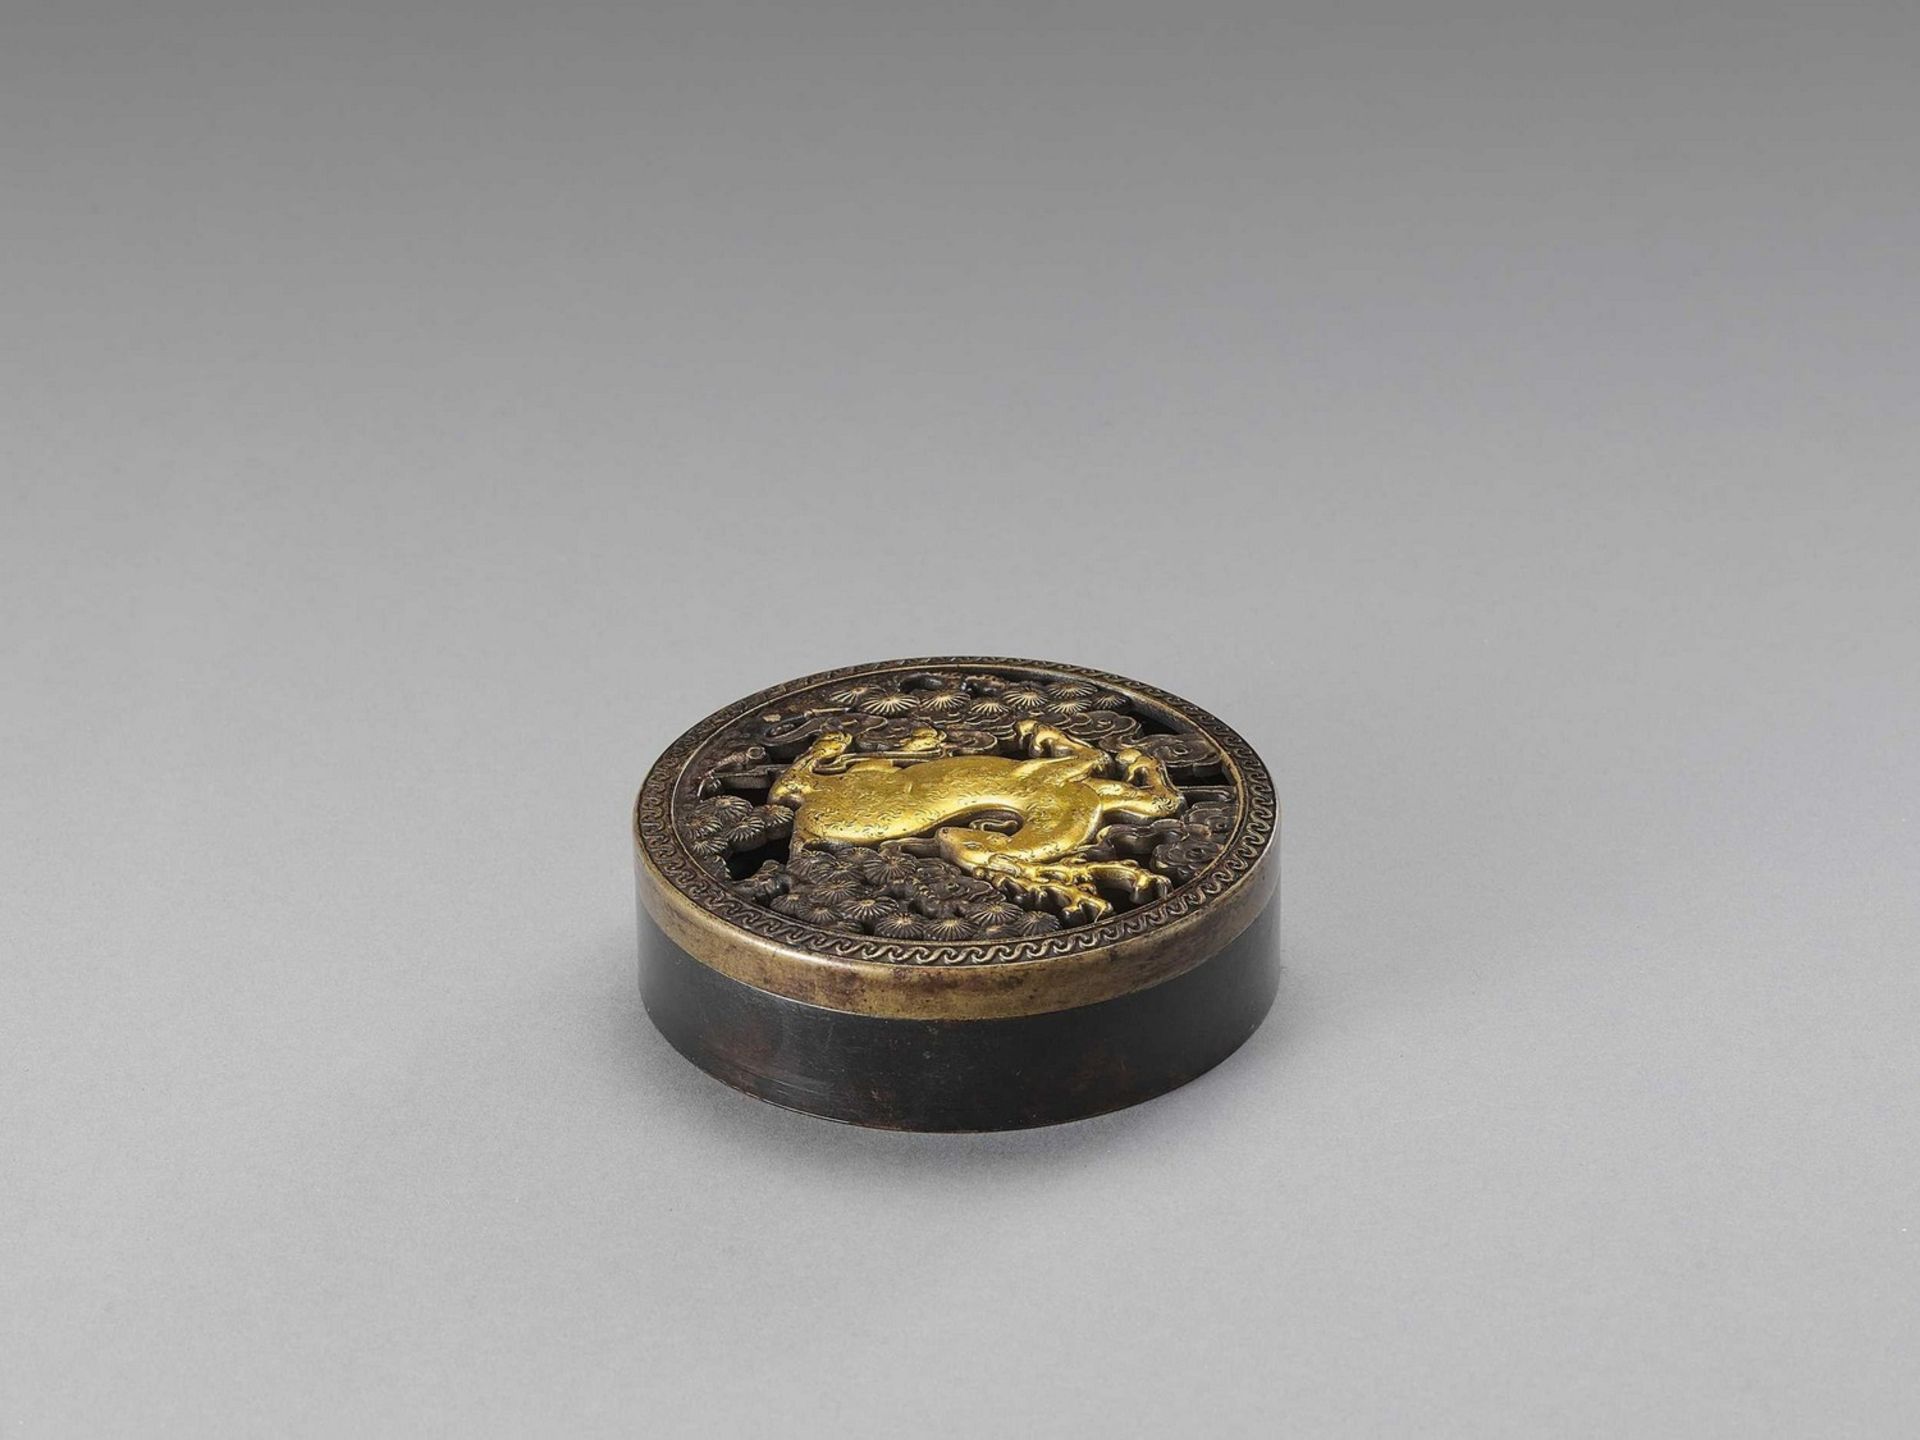 A PARCEL GILT ‘STAG AND PINE’ INCENSE BOX, LATE QING TO REPUBLIC - Image 4 of 4